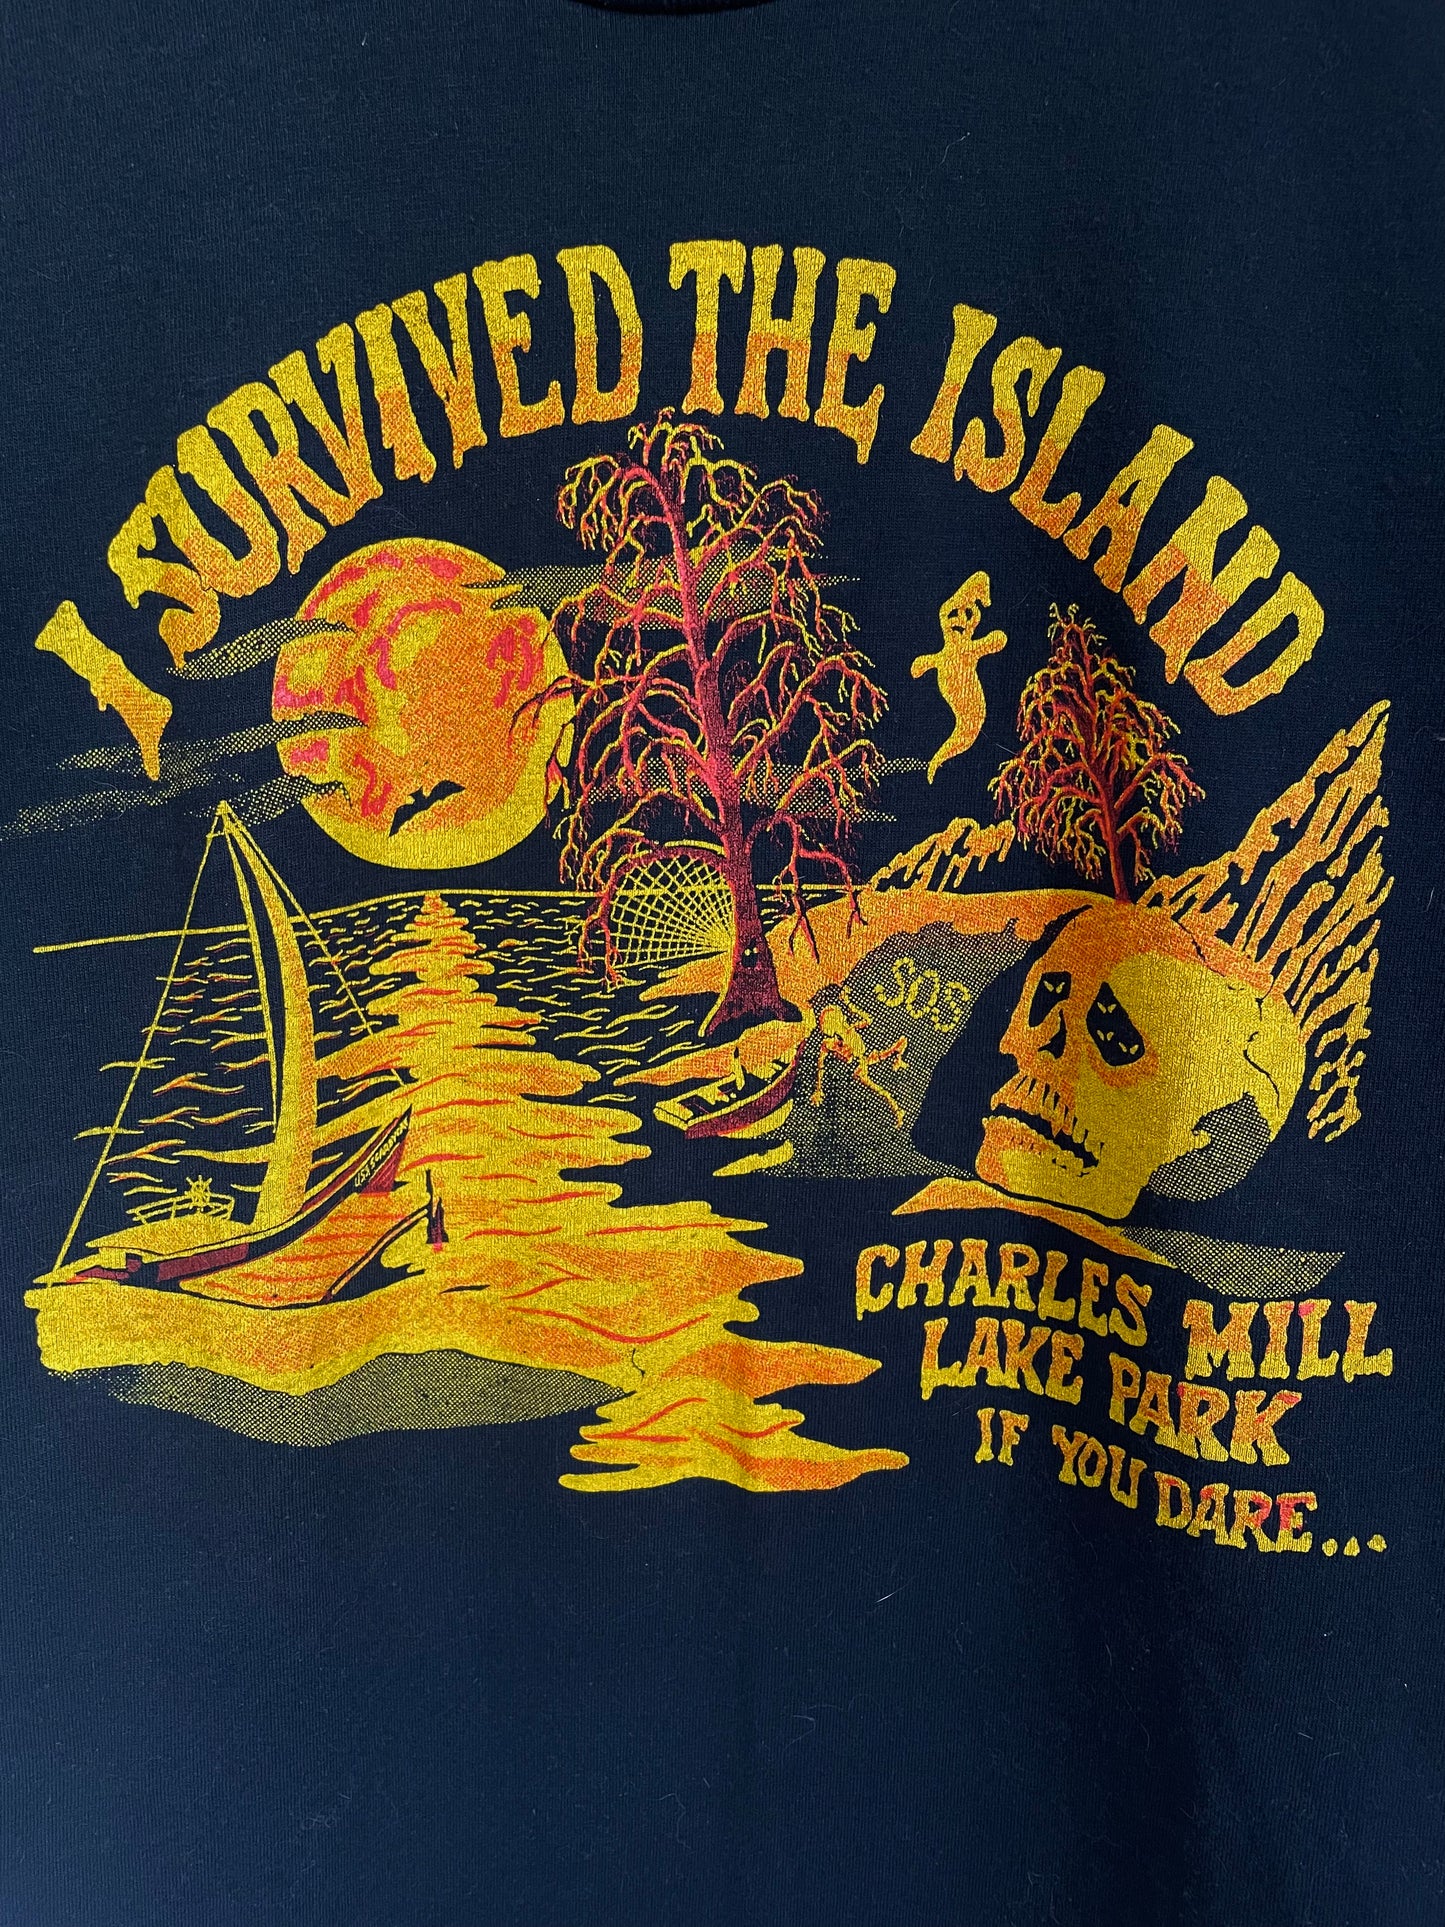 80s/90s I Survived The Island, Charles Mill Lake Park If You Dare… Tee